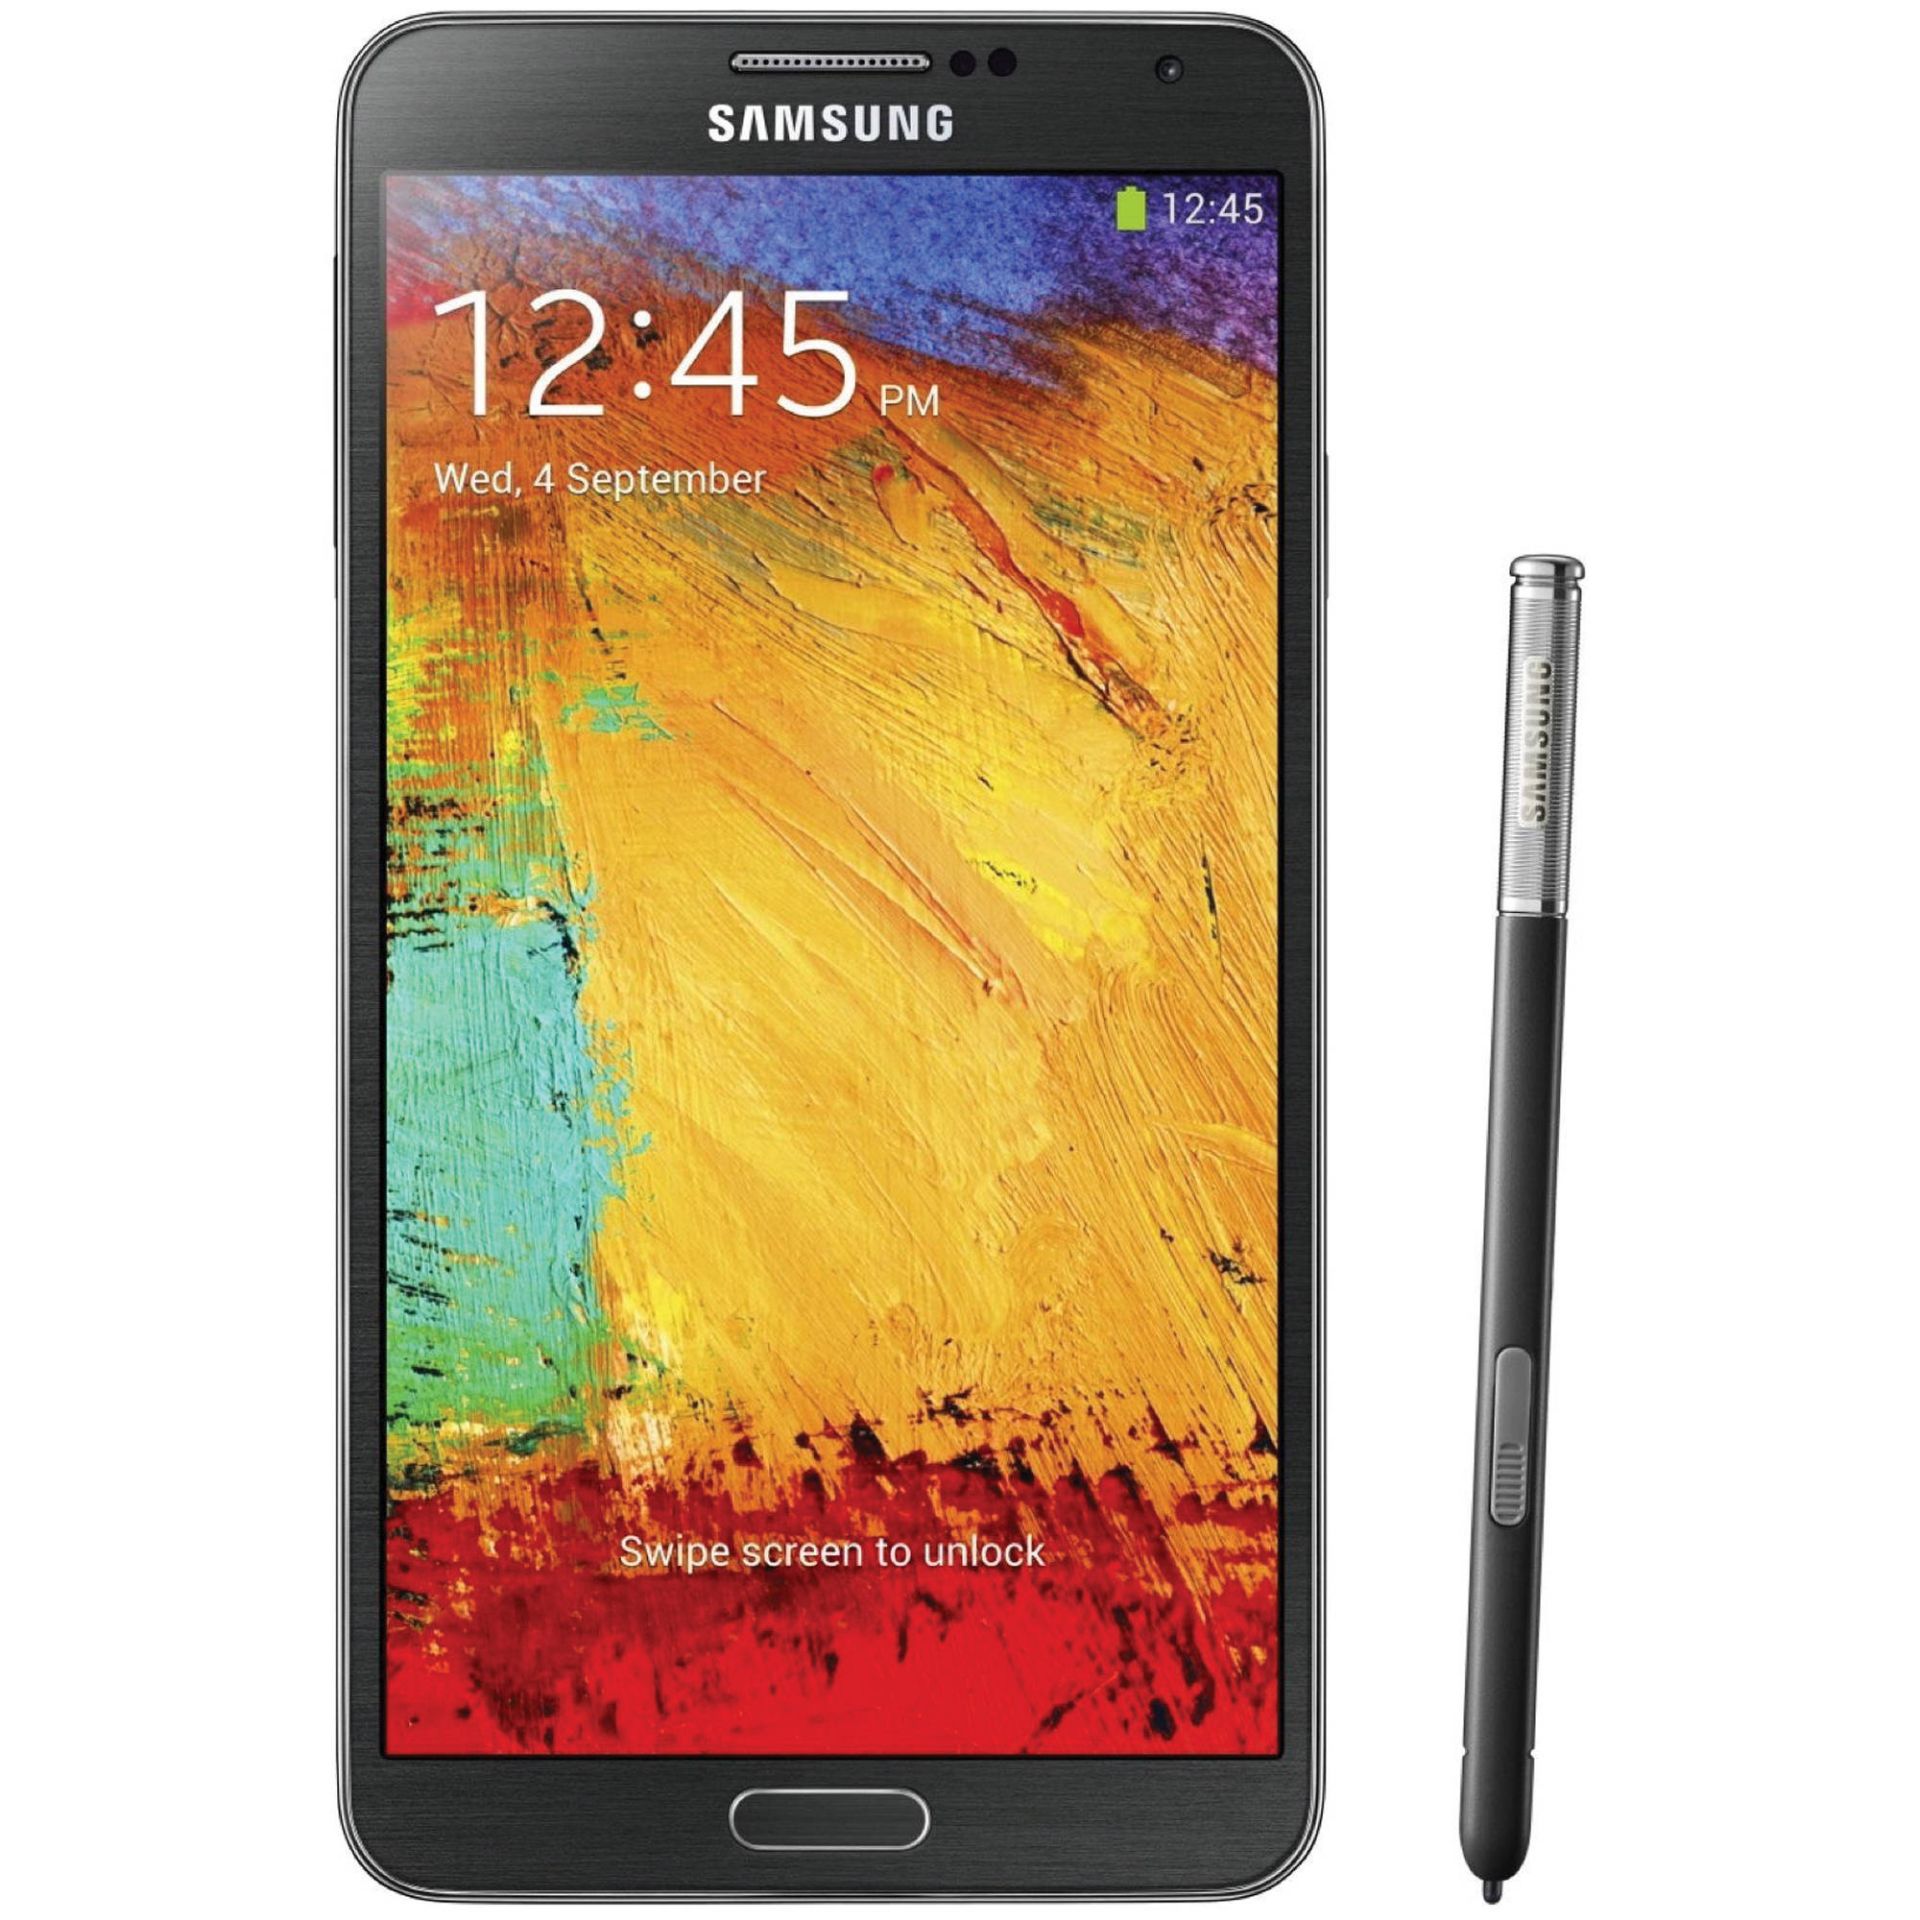 Grade A Samsung Note3 ( N900A/T/V/P ) Colours May Vary - Item Available After Approx 12 Working